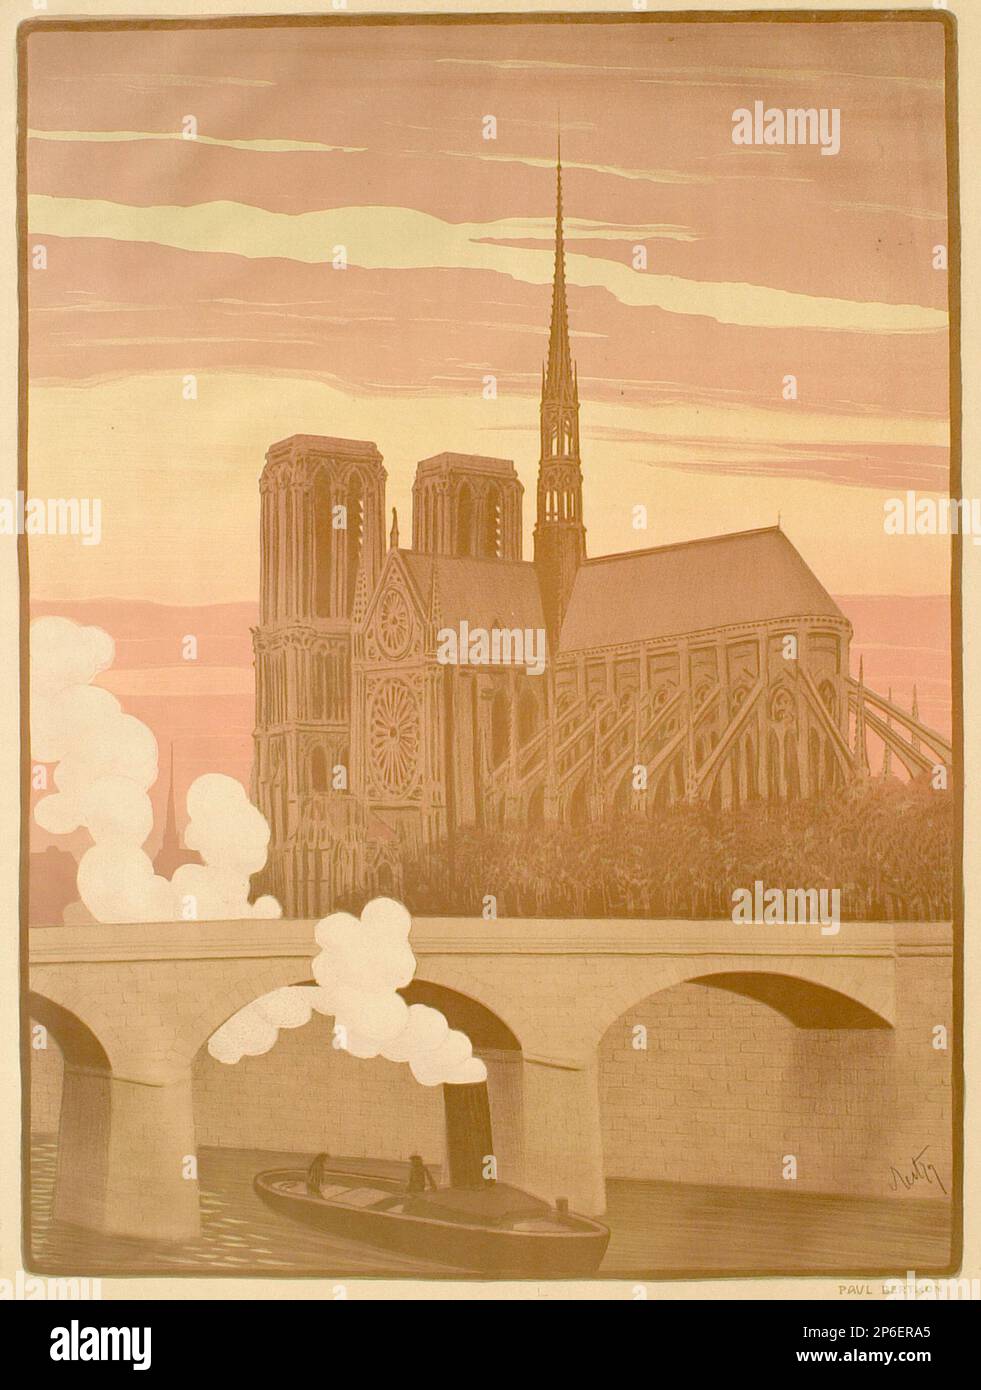 Paul Berthon, The Apse of Notre Dame de Paris Seen from the Seine, 1900, lithograph with three stones on paper. Stock Photo